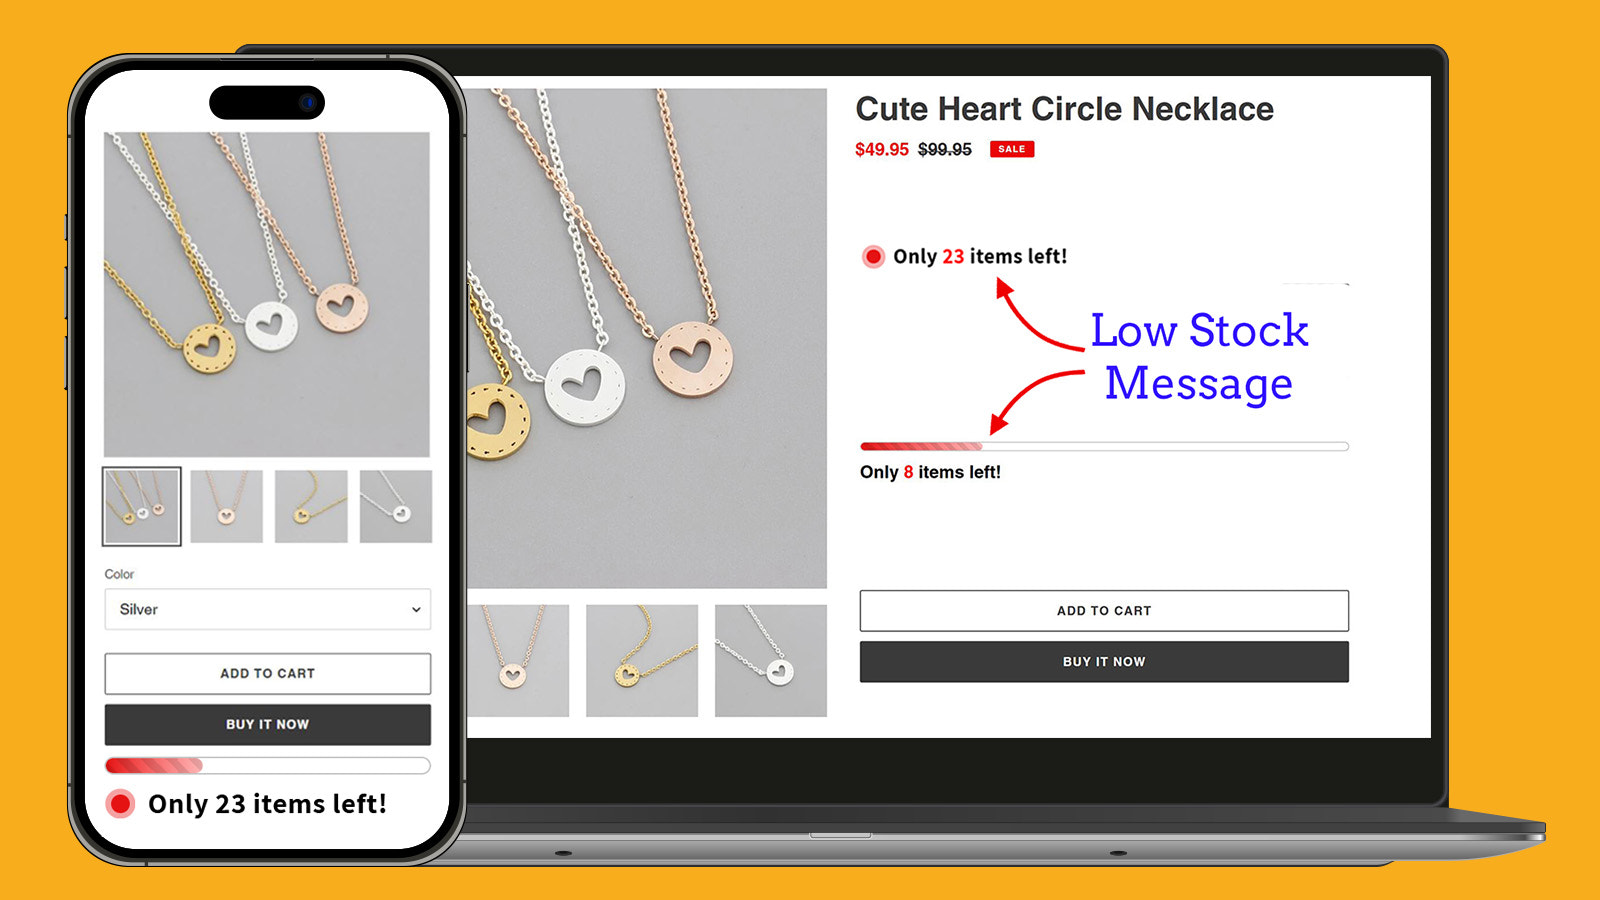 Low stock message creates urgency among customers to purchase